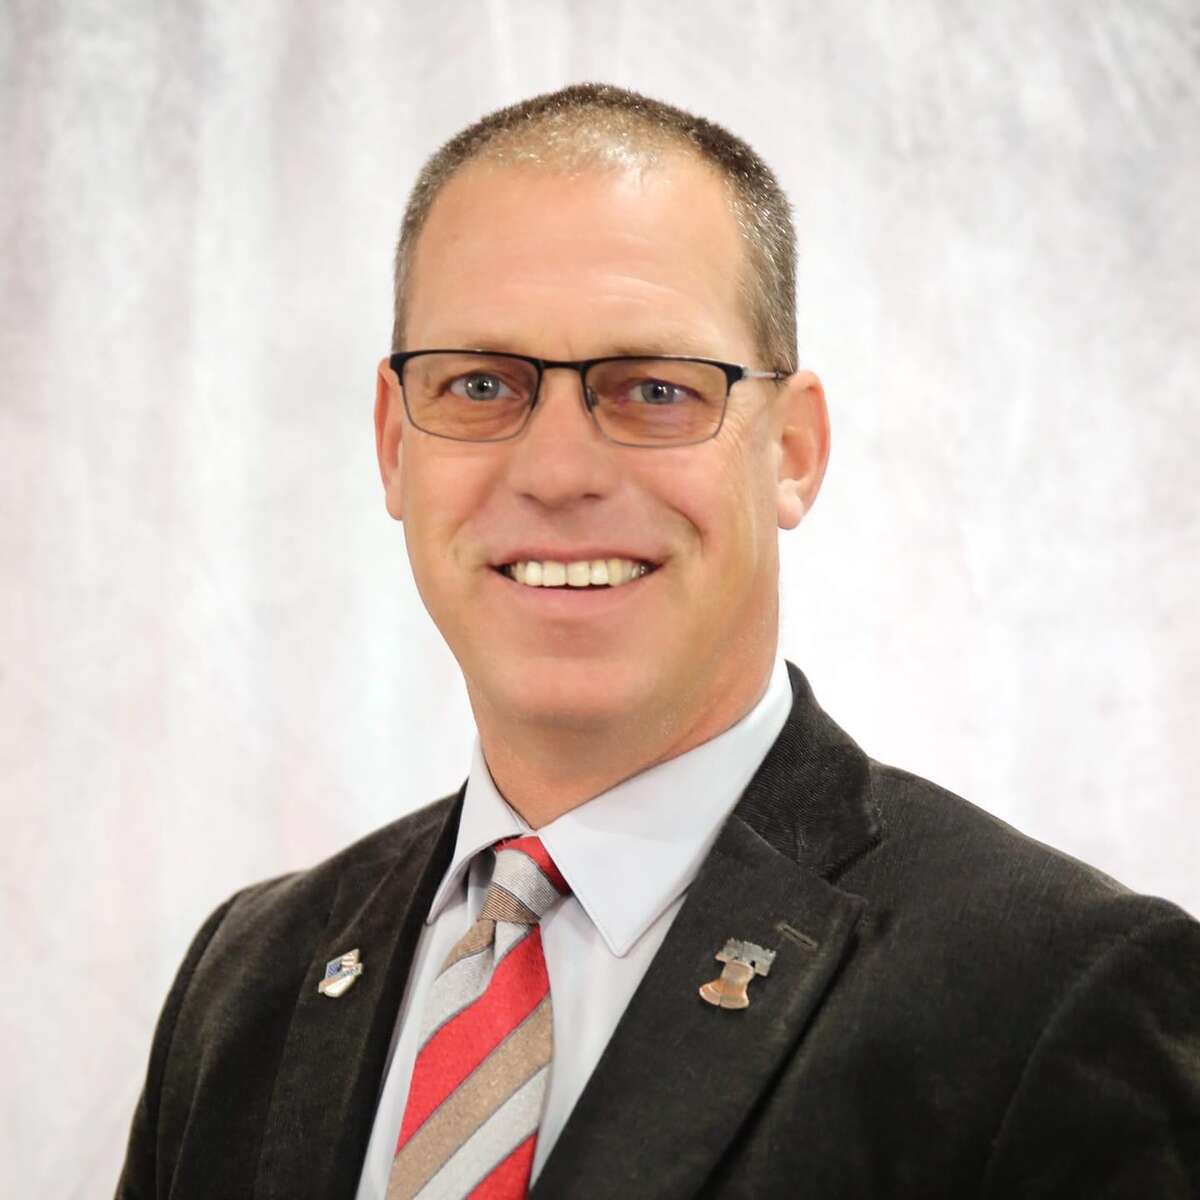 Michigan State Representative Greg Alexander has set up coffee hour meetings to have with the residents of his district to talk about their questions, thoughts, and/or concerns they have in the area.